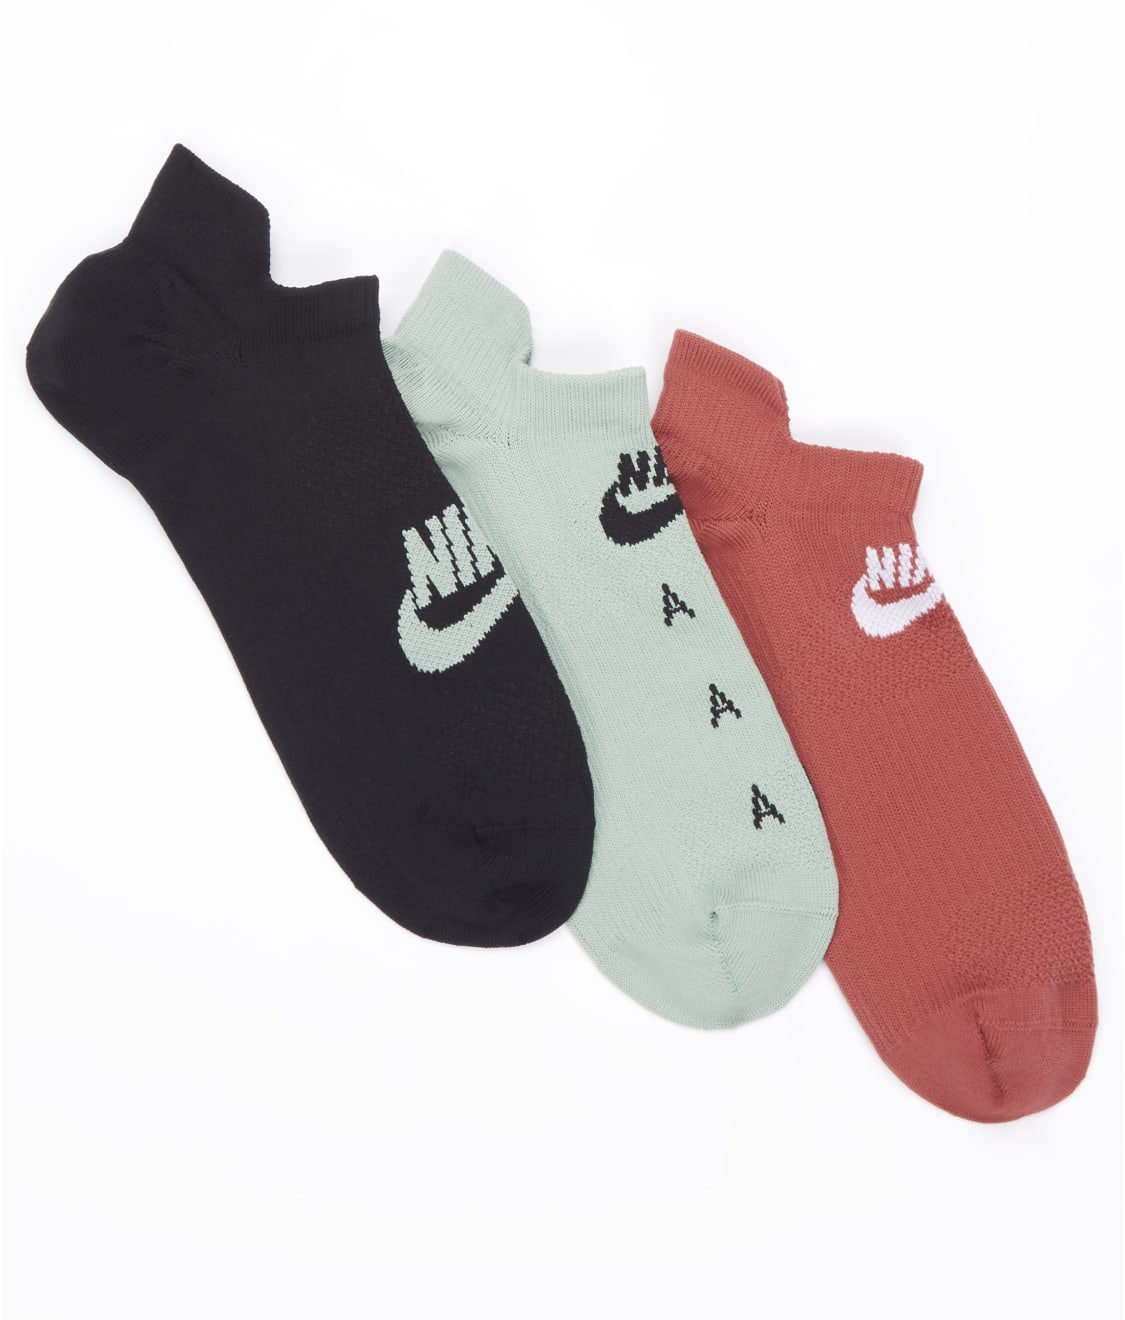 Nike Nike Air Everyday Plus Low-Cut Ankle Socks 3-Pack Reviews | Bare Necessities (Style CU8388)